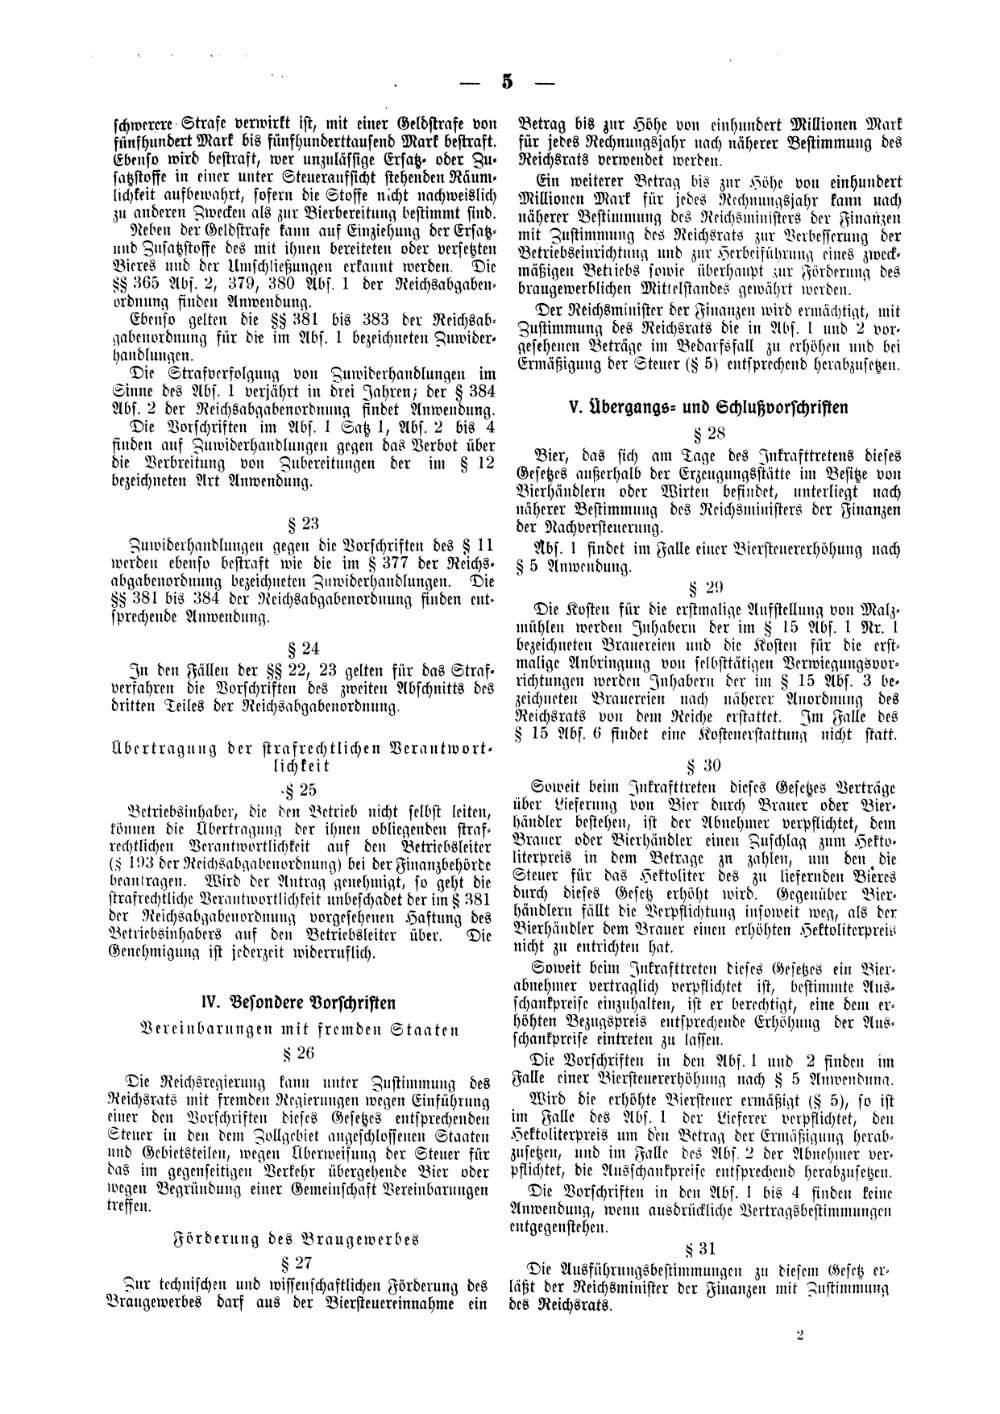 Scan of page 5